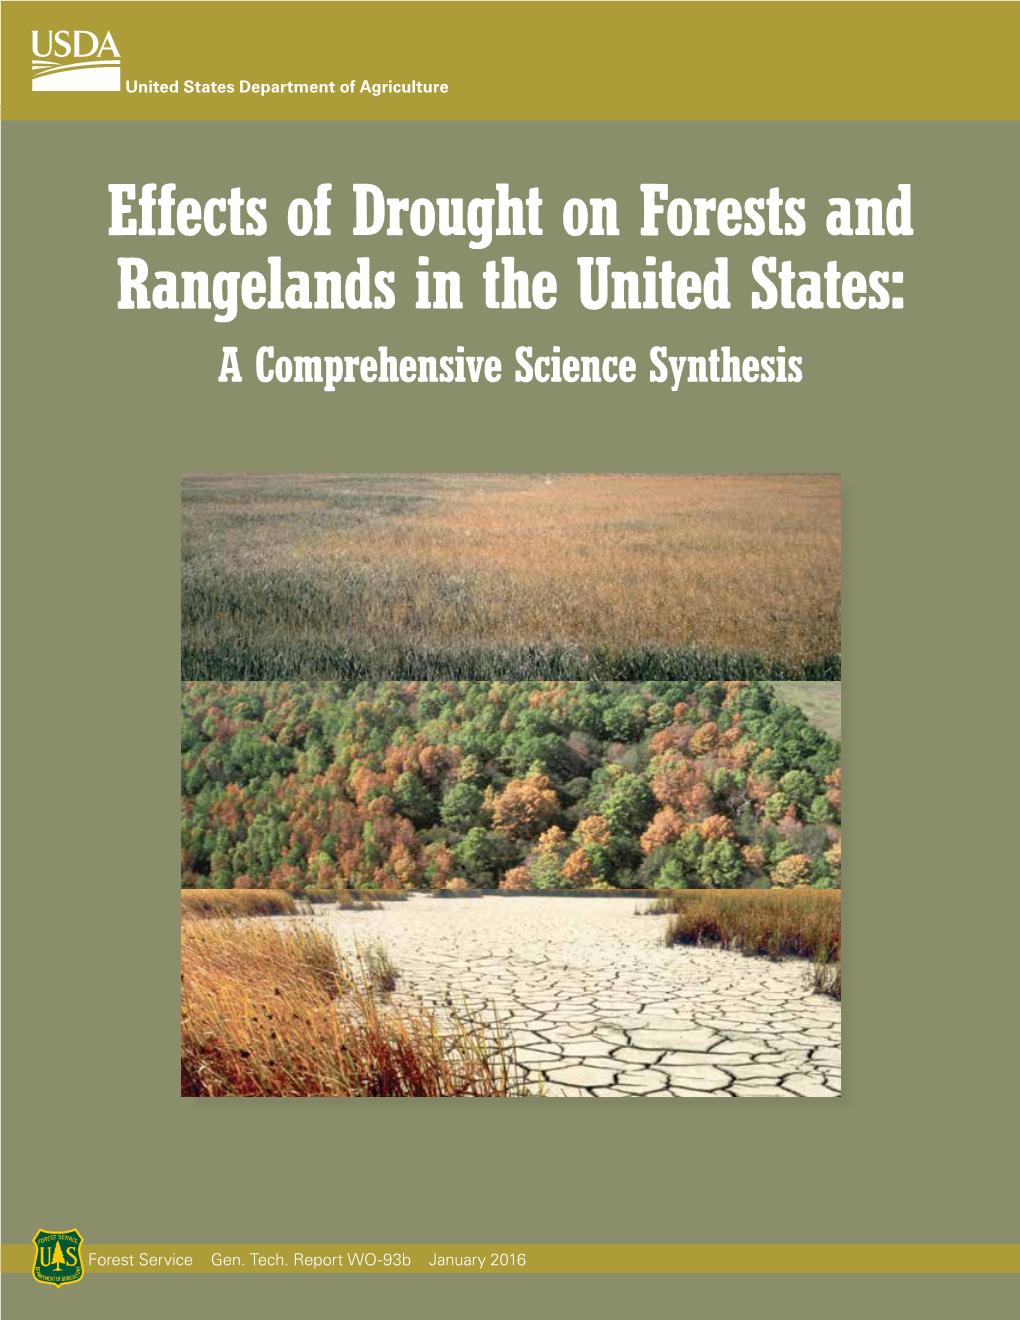 Effects of Drought on Forests and Rangelands in the United States: a Comprehensive Science Synthesis